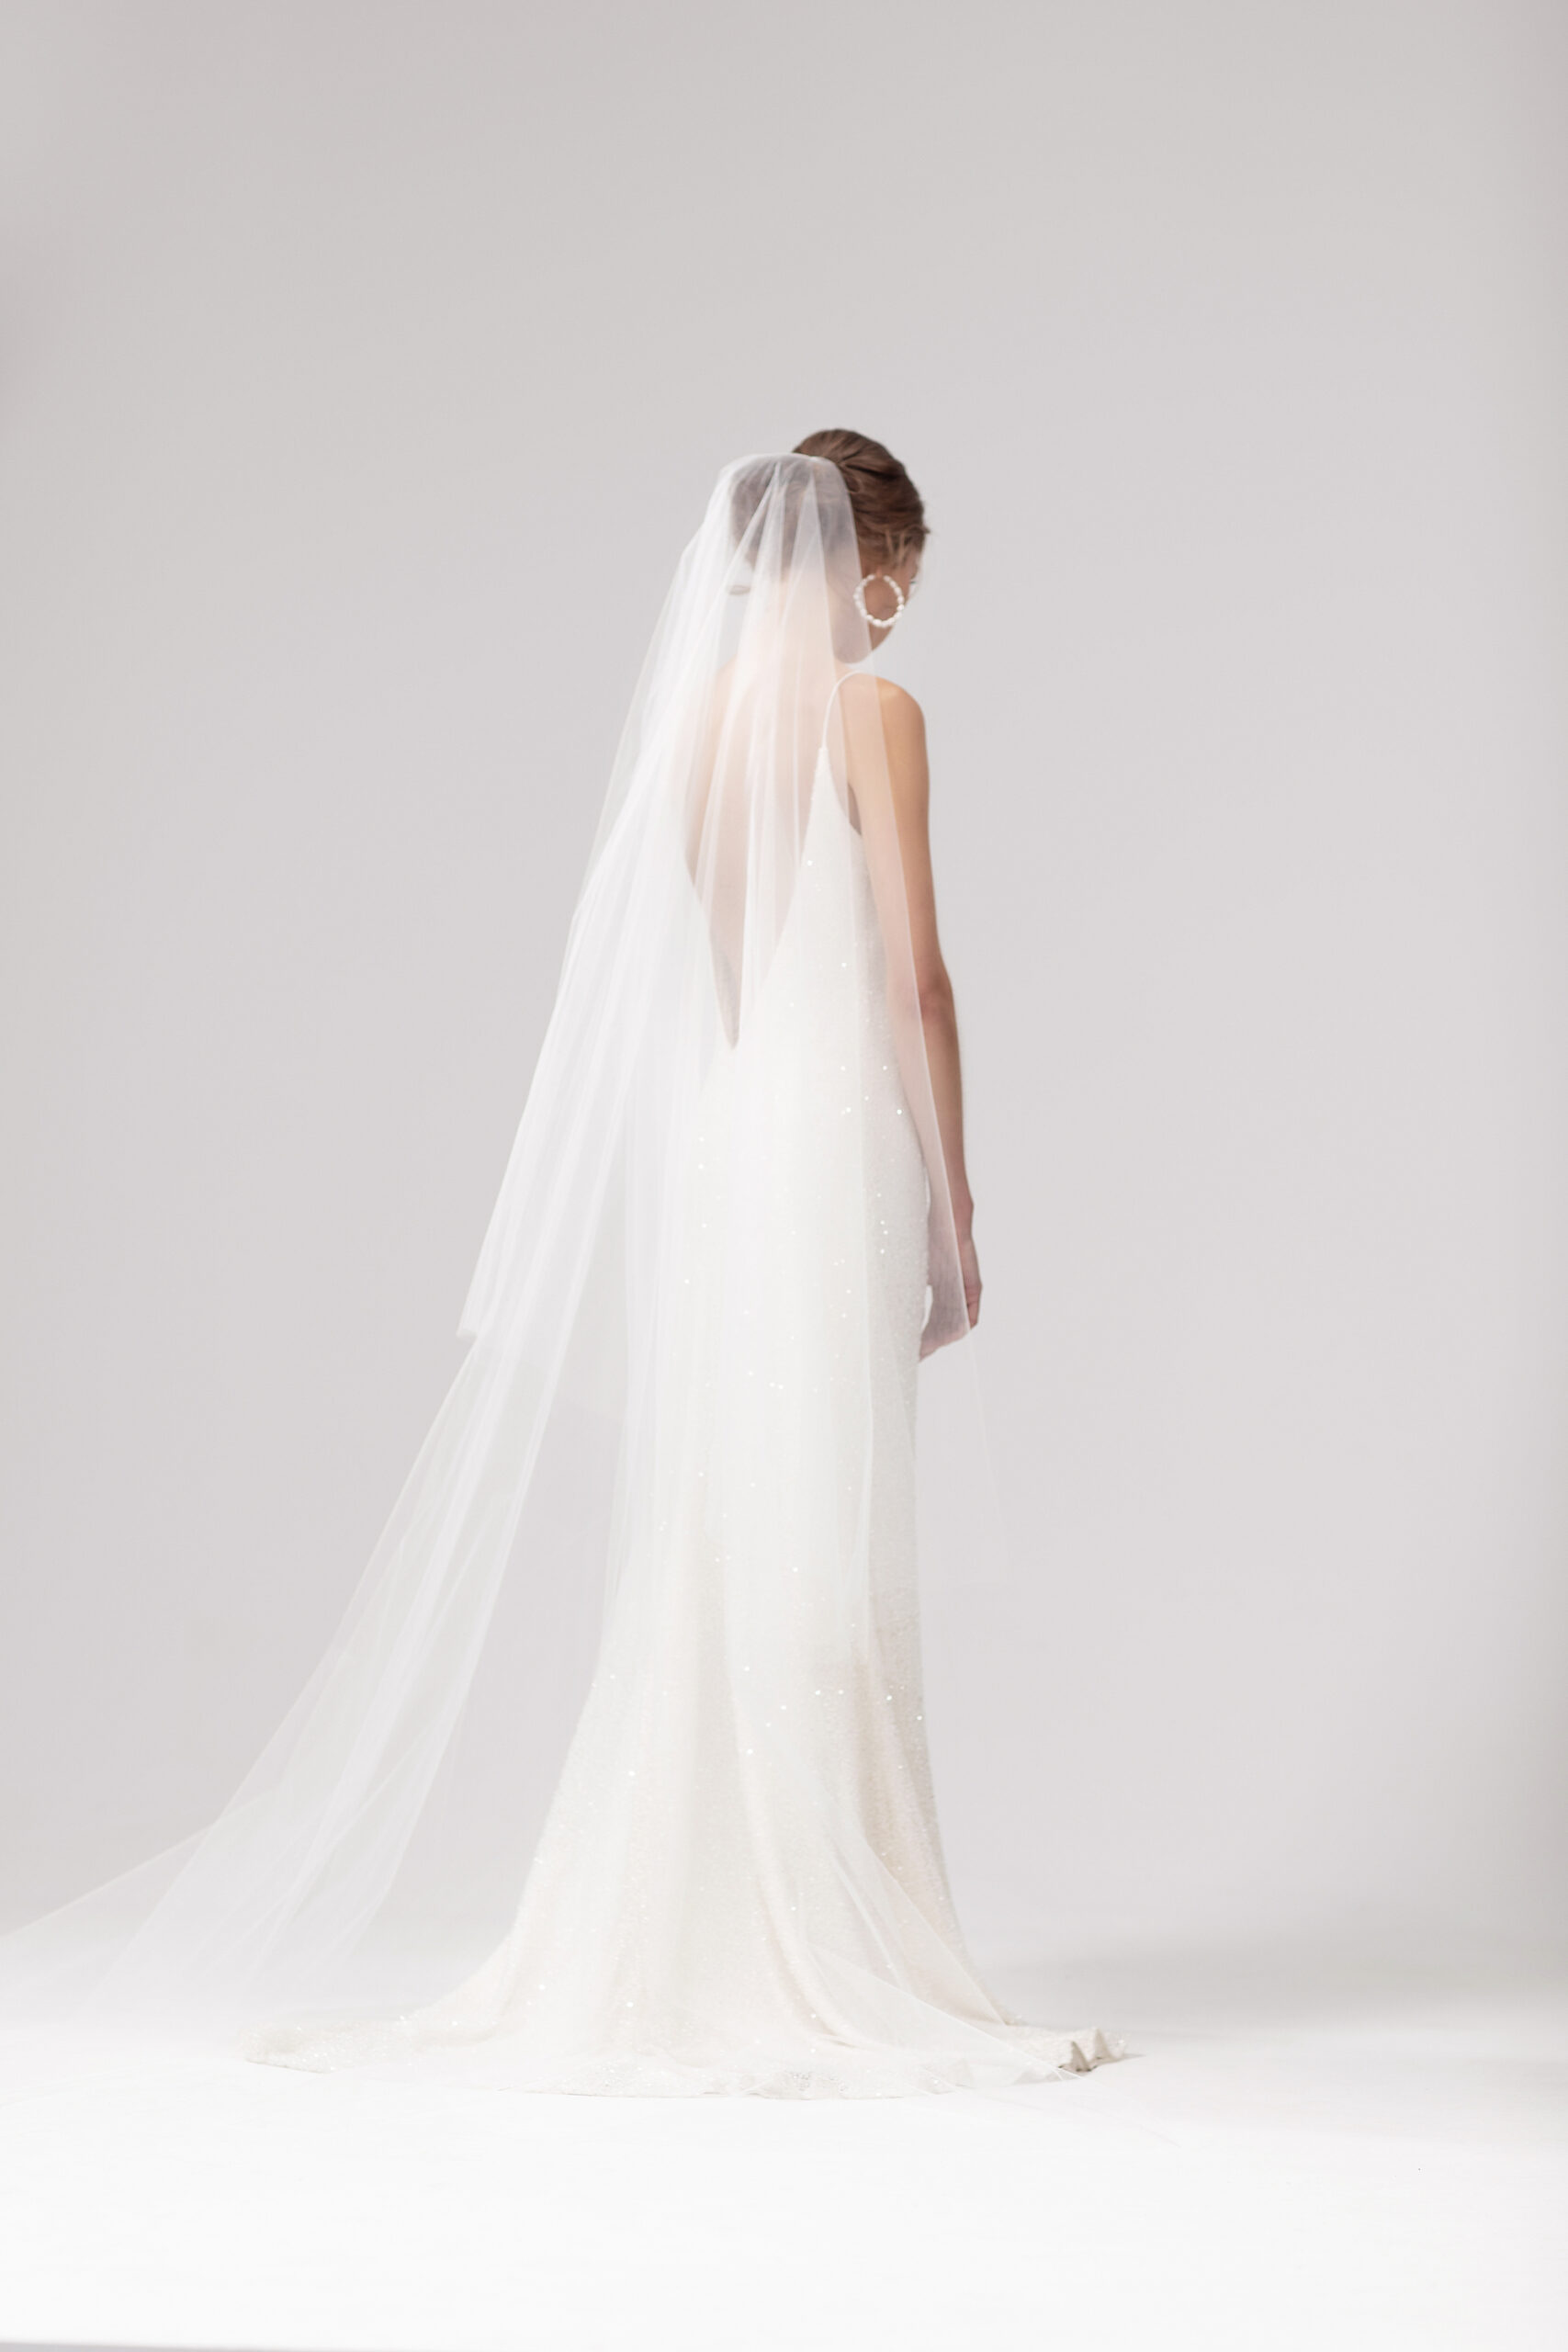 Back view of model wearing the Cher veil with both tiers at the back. Cher is a two-tier blusher style veil 2.5m long with a raw edge.